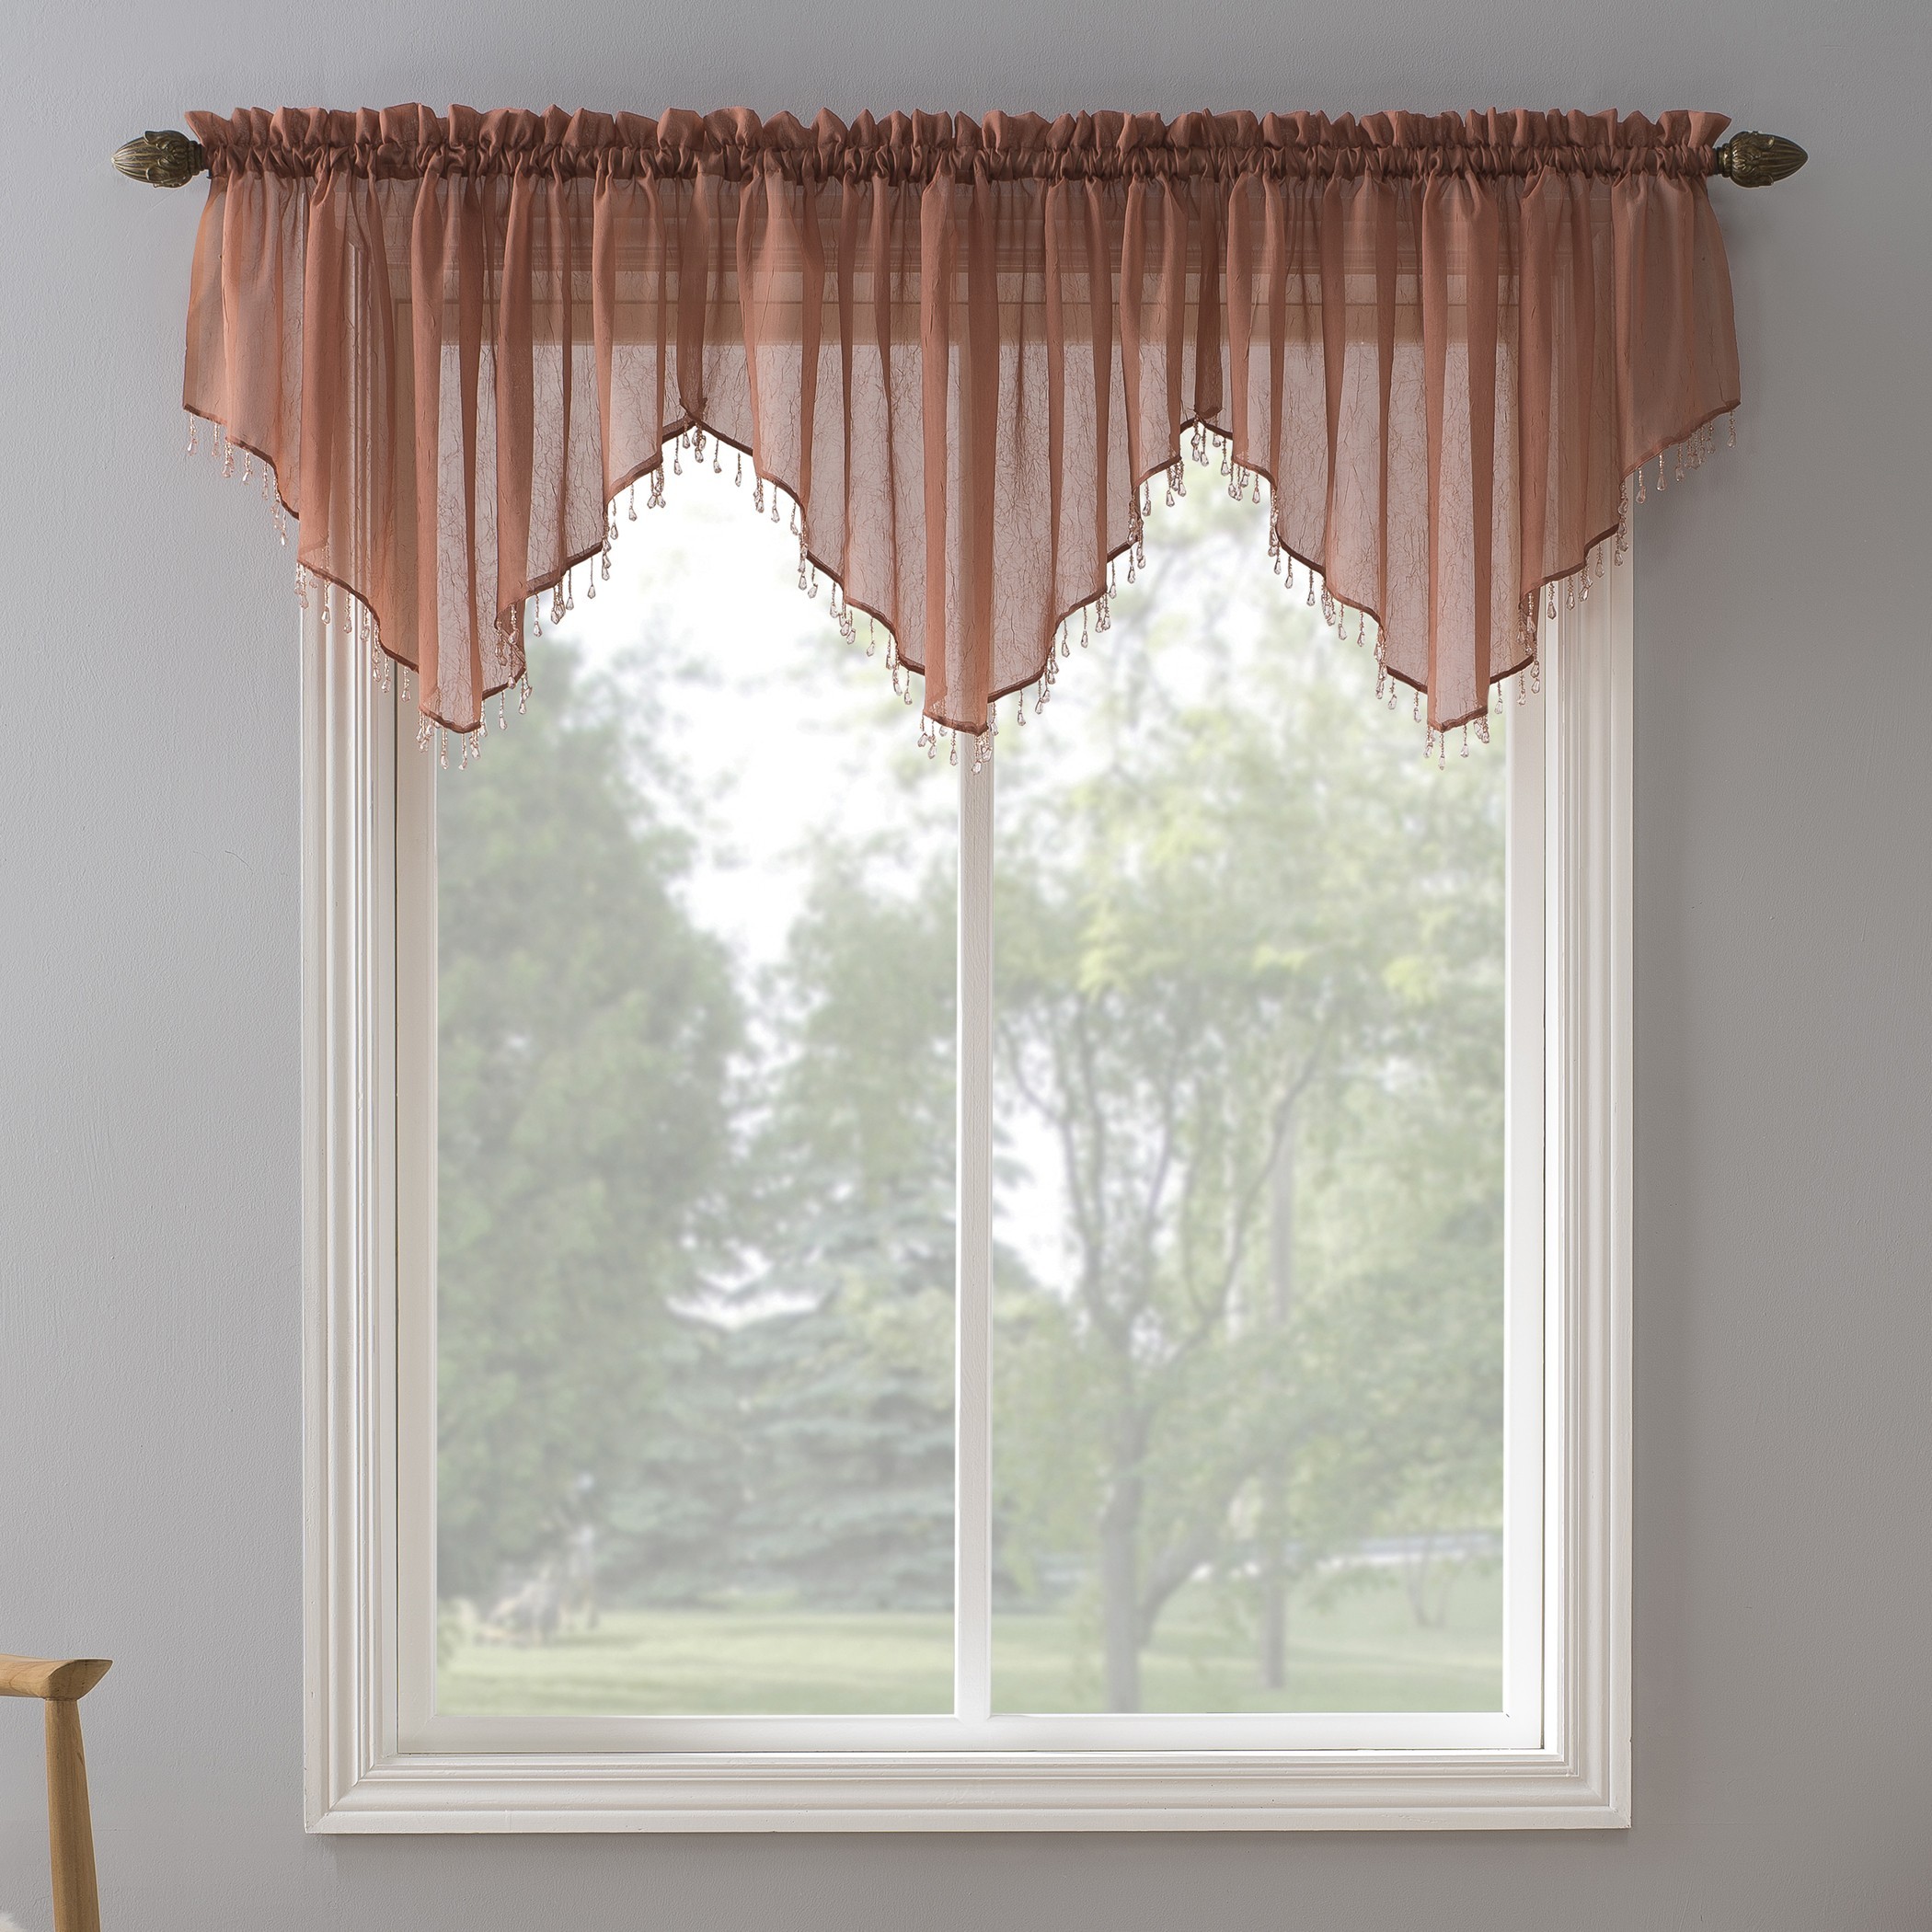 How To Choose Valances And Kitchen Curtains - Foter